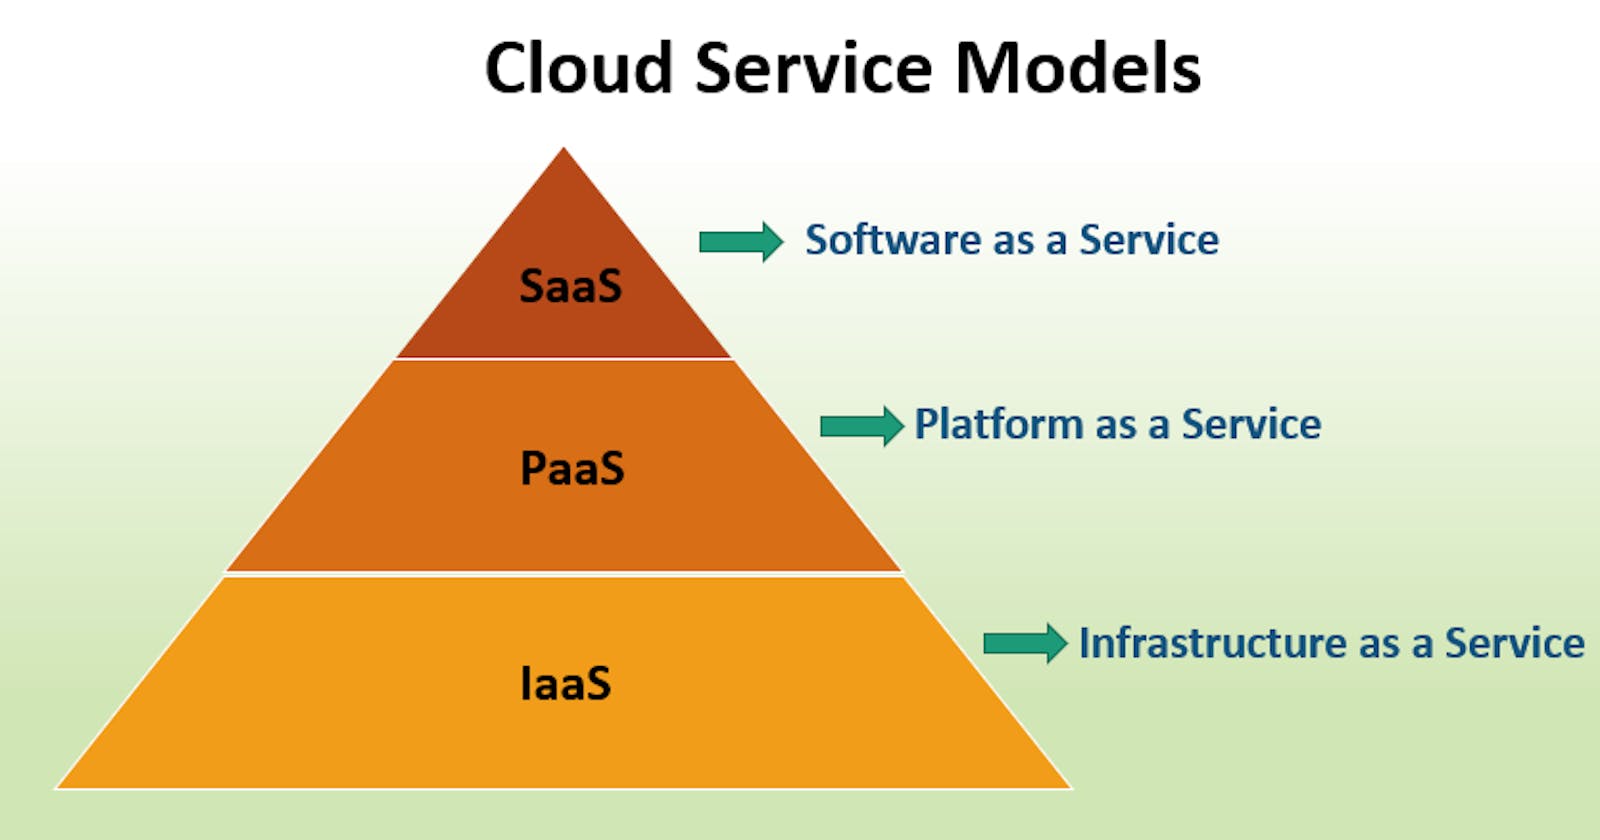 What are the Service Models in Cloud?